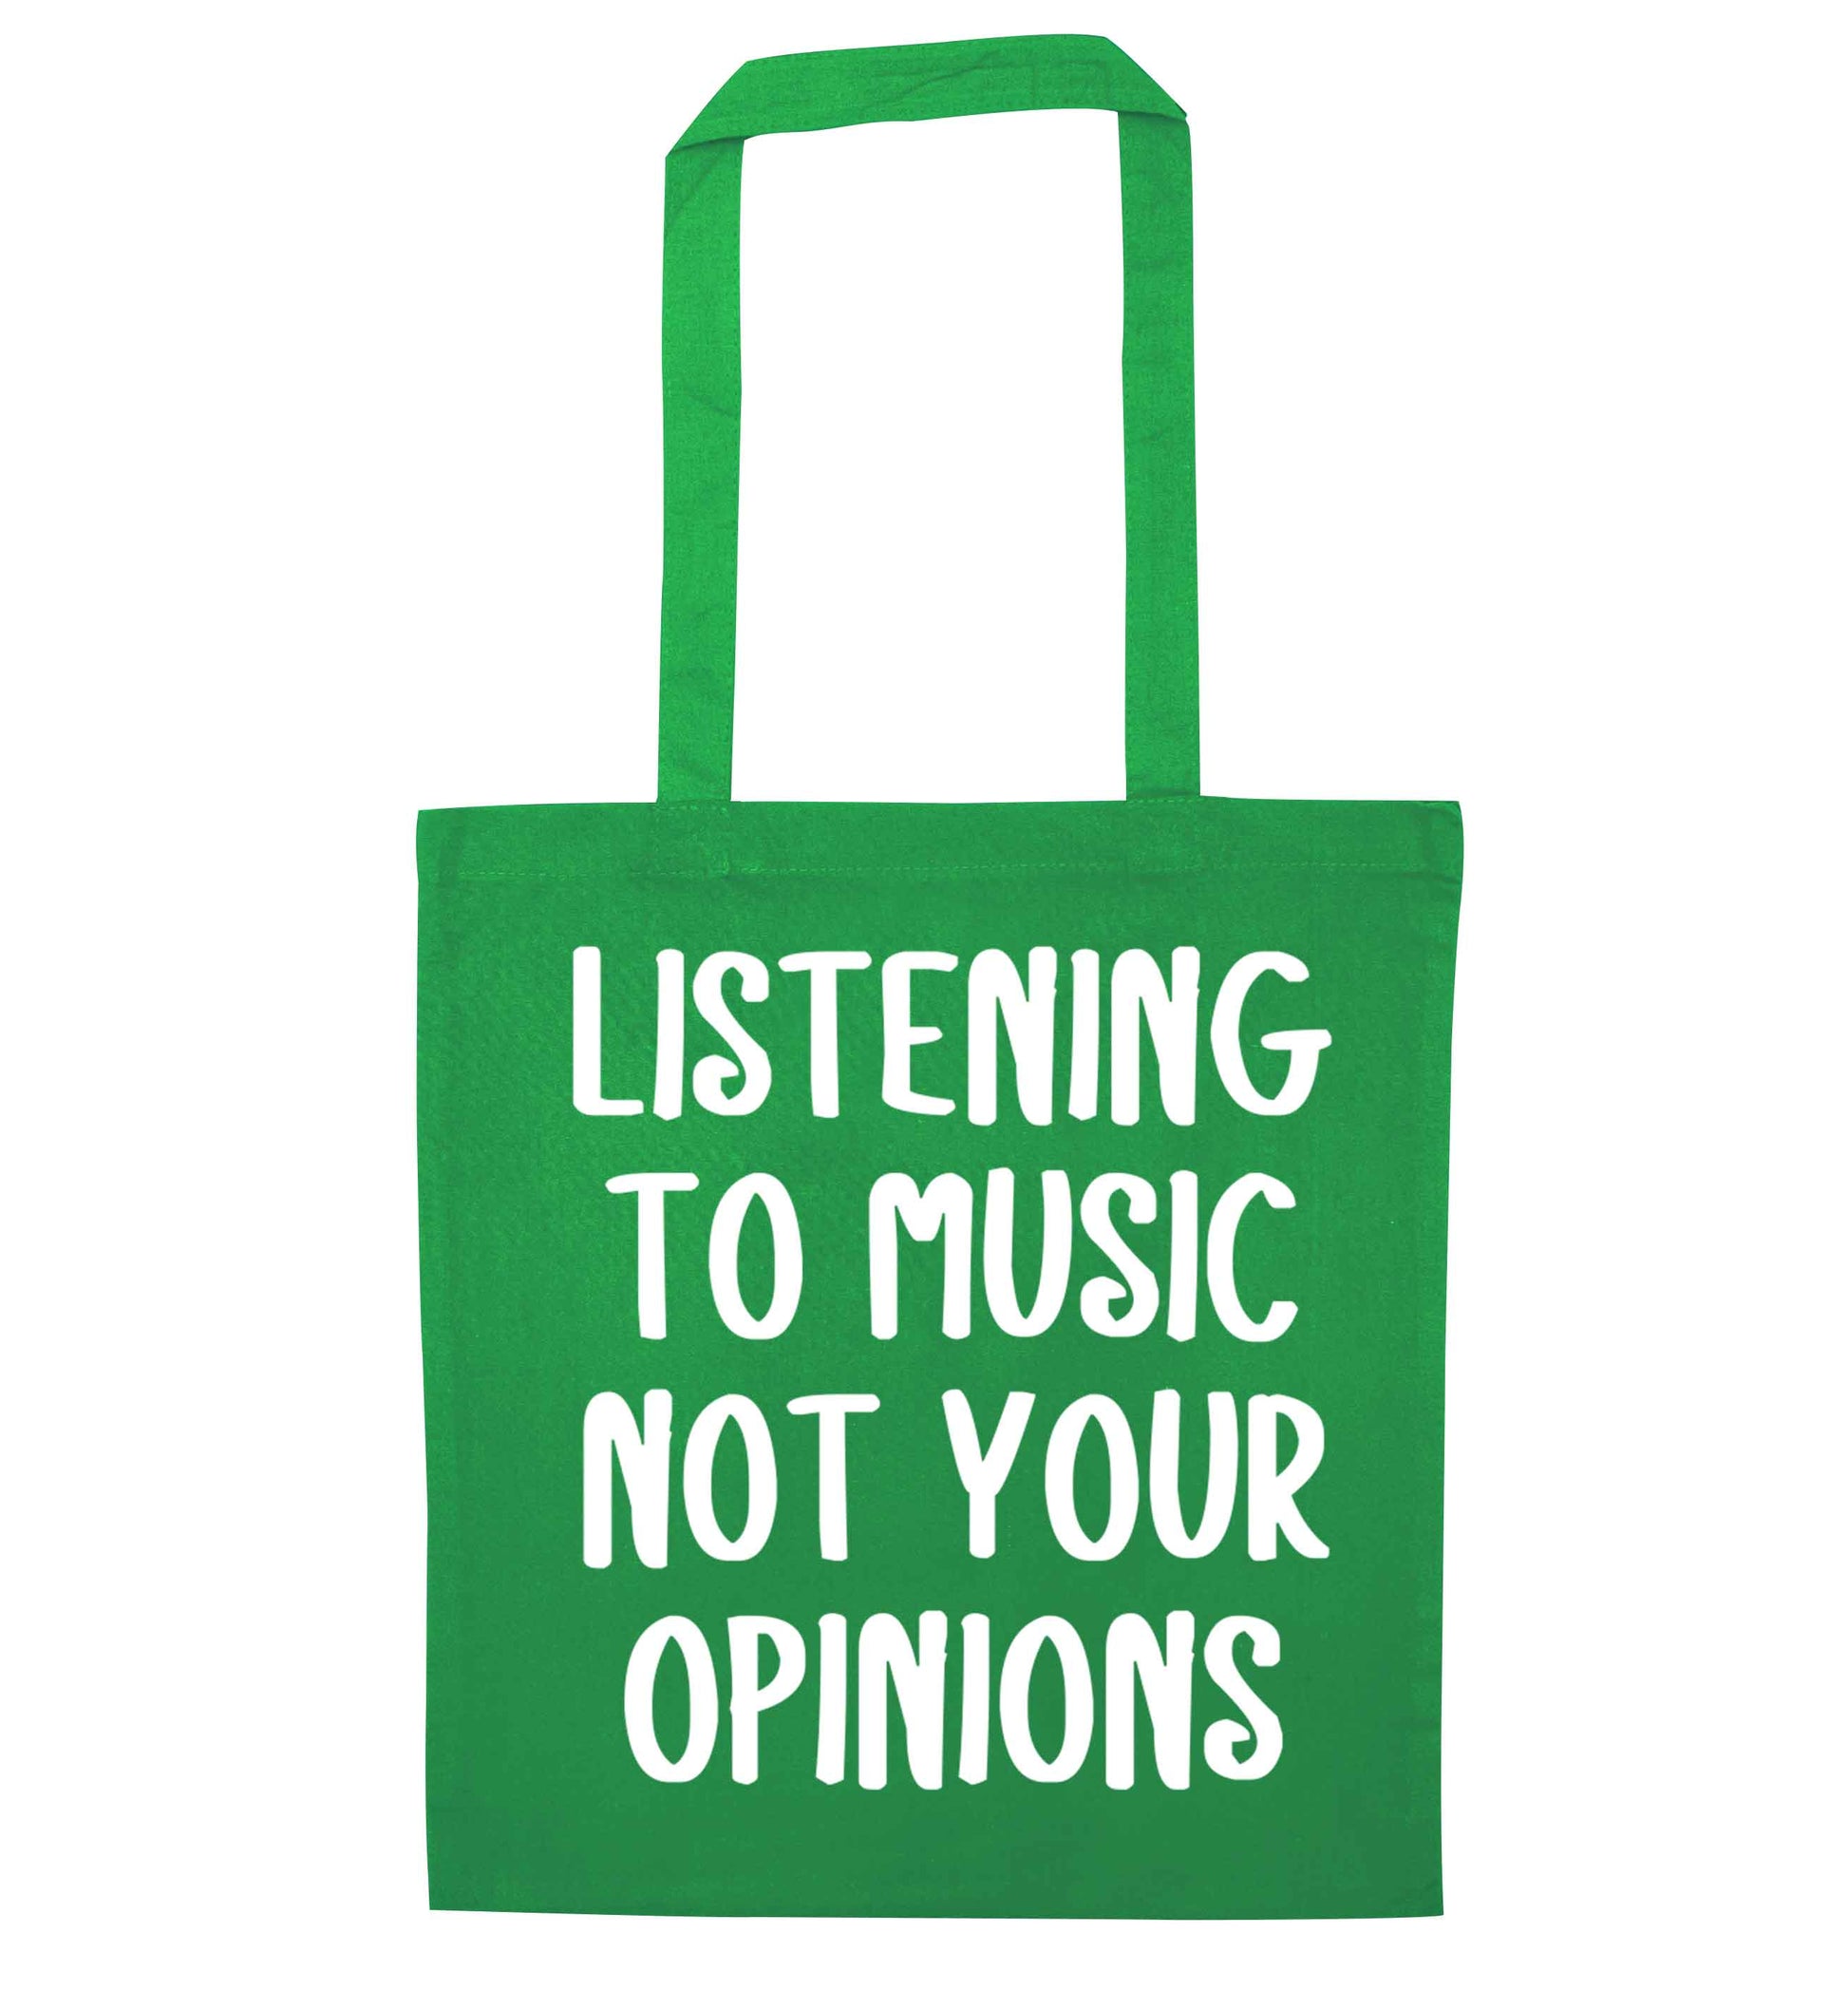 Listening to music not your opinions green tote bag